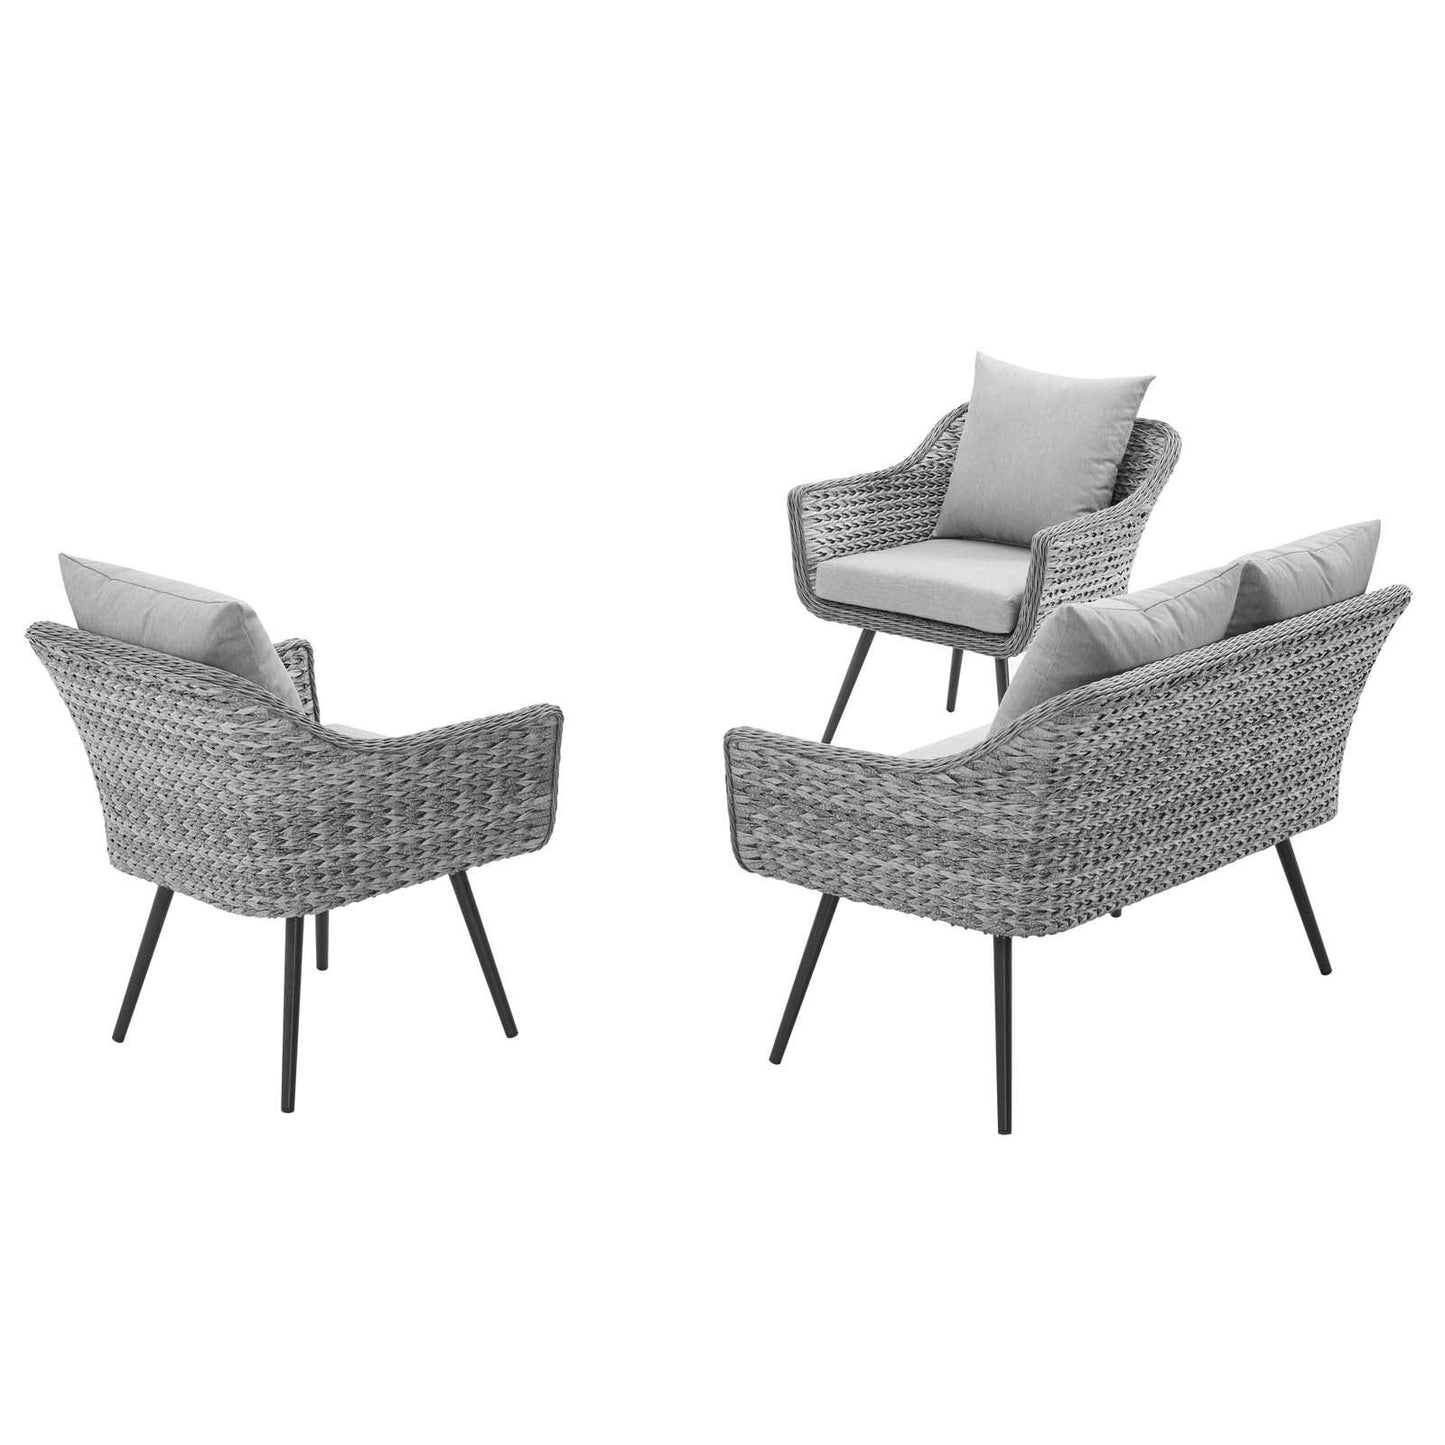 Modway Endeavor 3 Piece Outdoor Patio Wicker Rattan Loveseat and Armchair Set FredCo